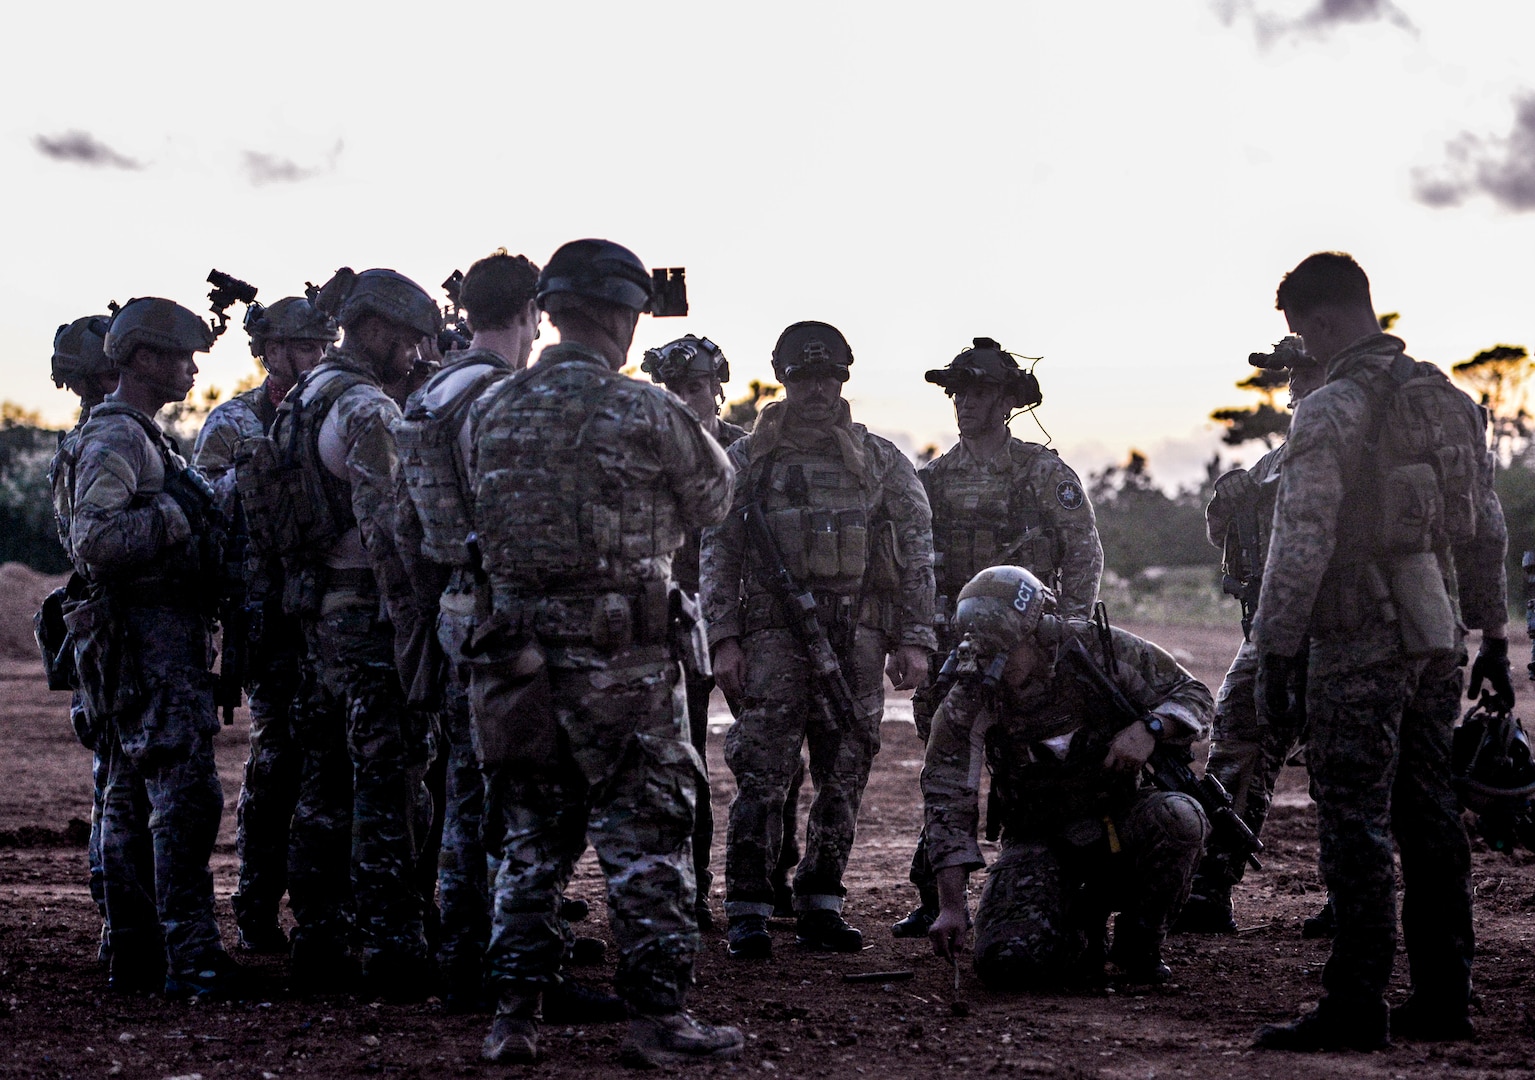 Airmen from the 320th Special Tactics Squadron gather around their team lead outside a shoot house as he discusses details of an upcoming mission Nov. 19, 2015, in Camp Hansen, Japan. Extensive planning and coordination is put into STS operations in order to maximize mission effectiveness and safety. (U.S. Air Force photo by Senior Airman John Linzmeier)